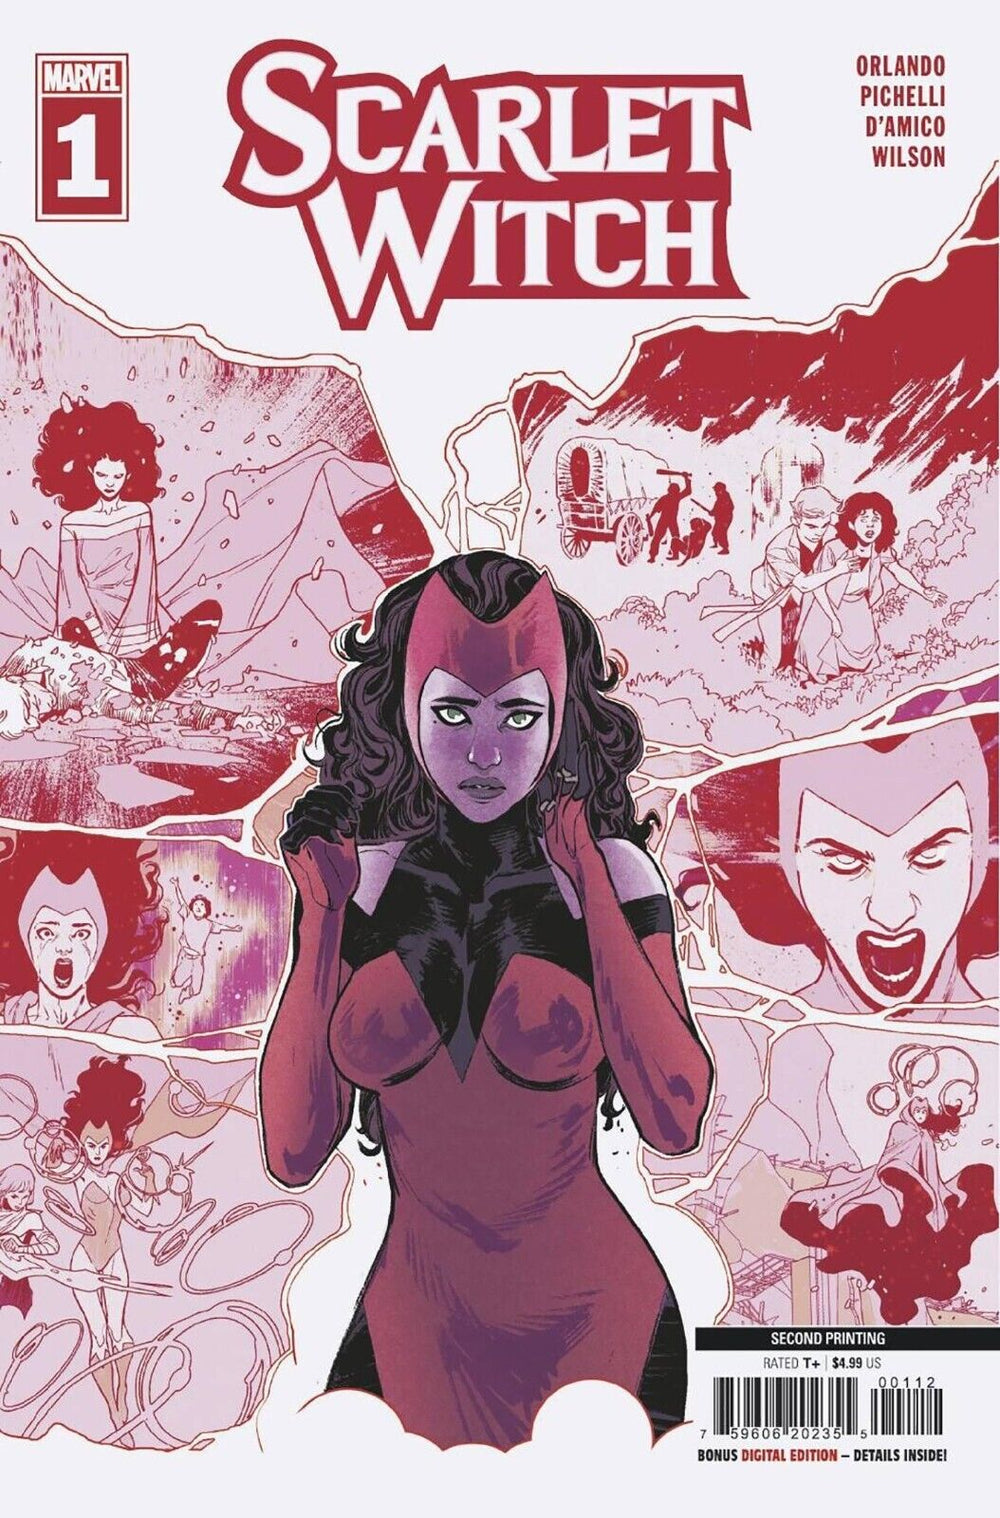 SCARLET WITCH #1 2ND PRINT PICHELLI VARIANT